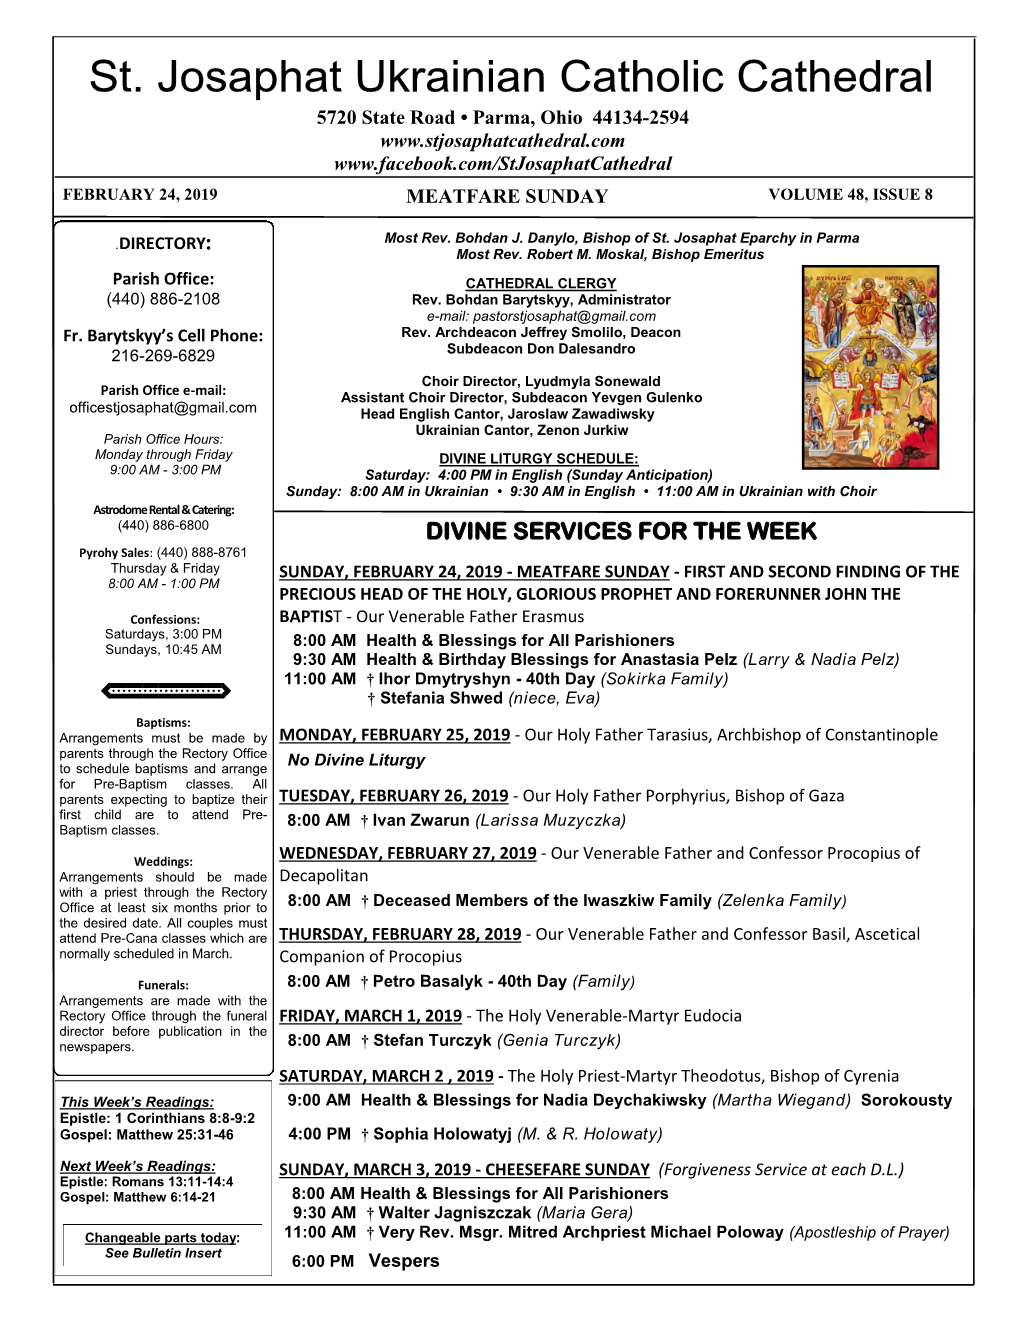 Divine Services for the Week